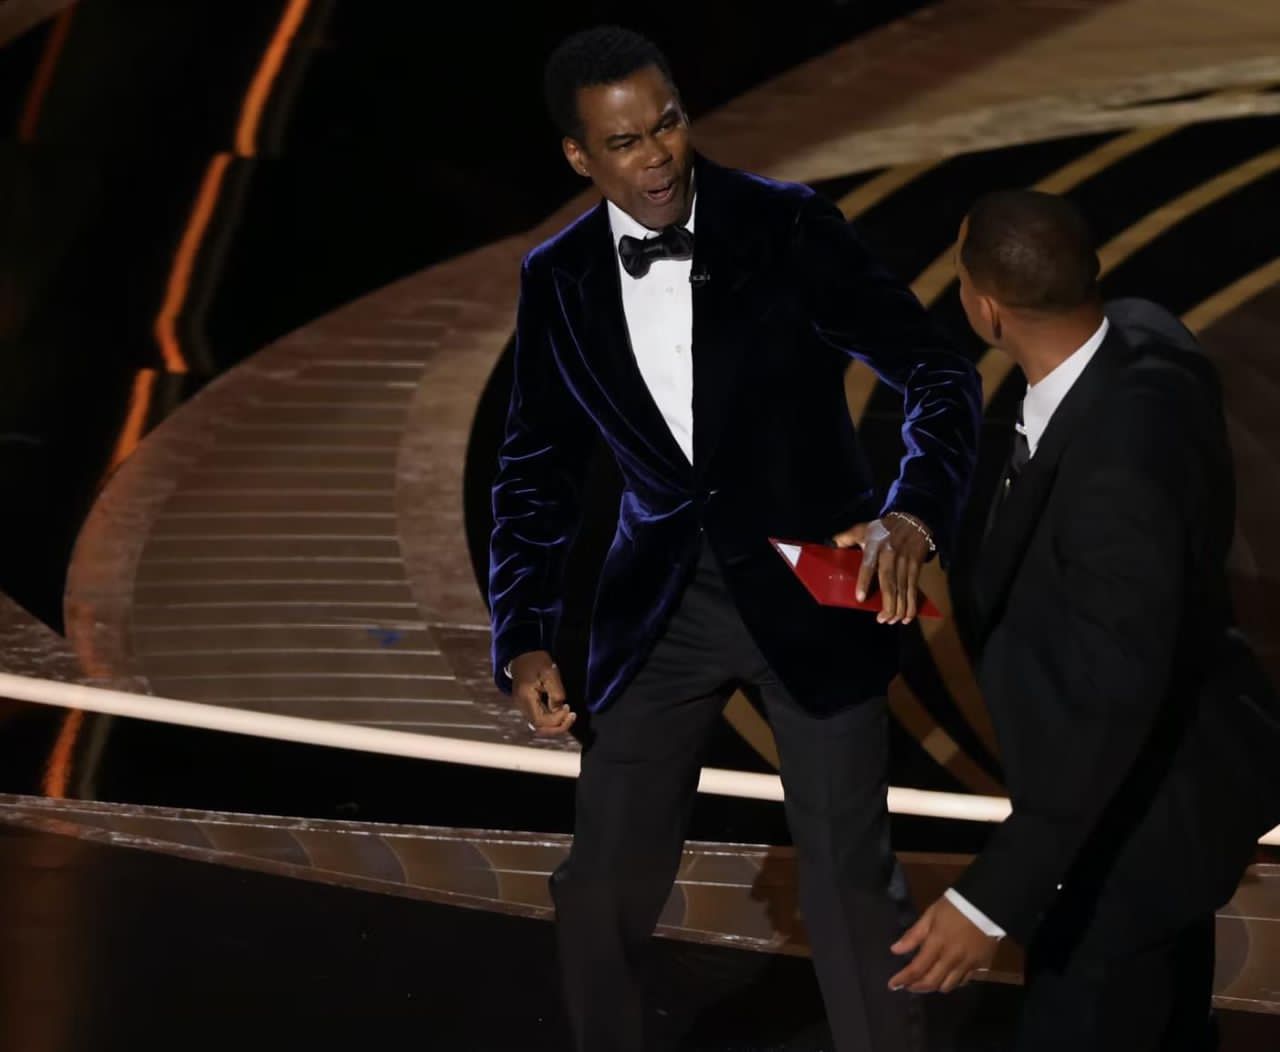 Will Smith Has Two Weeks To Save Oscar Award, Career After Assault On Chris Rock –Report